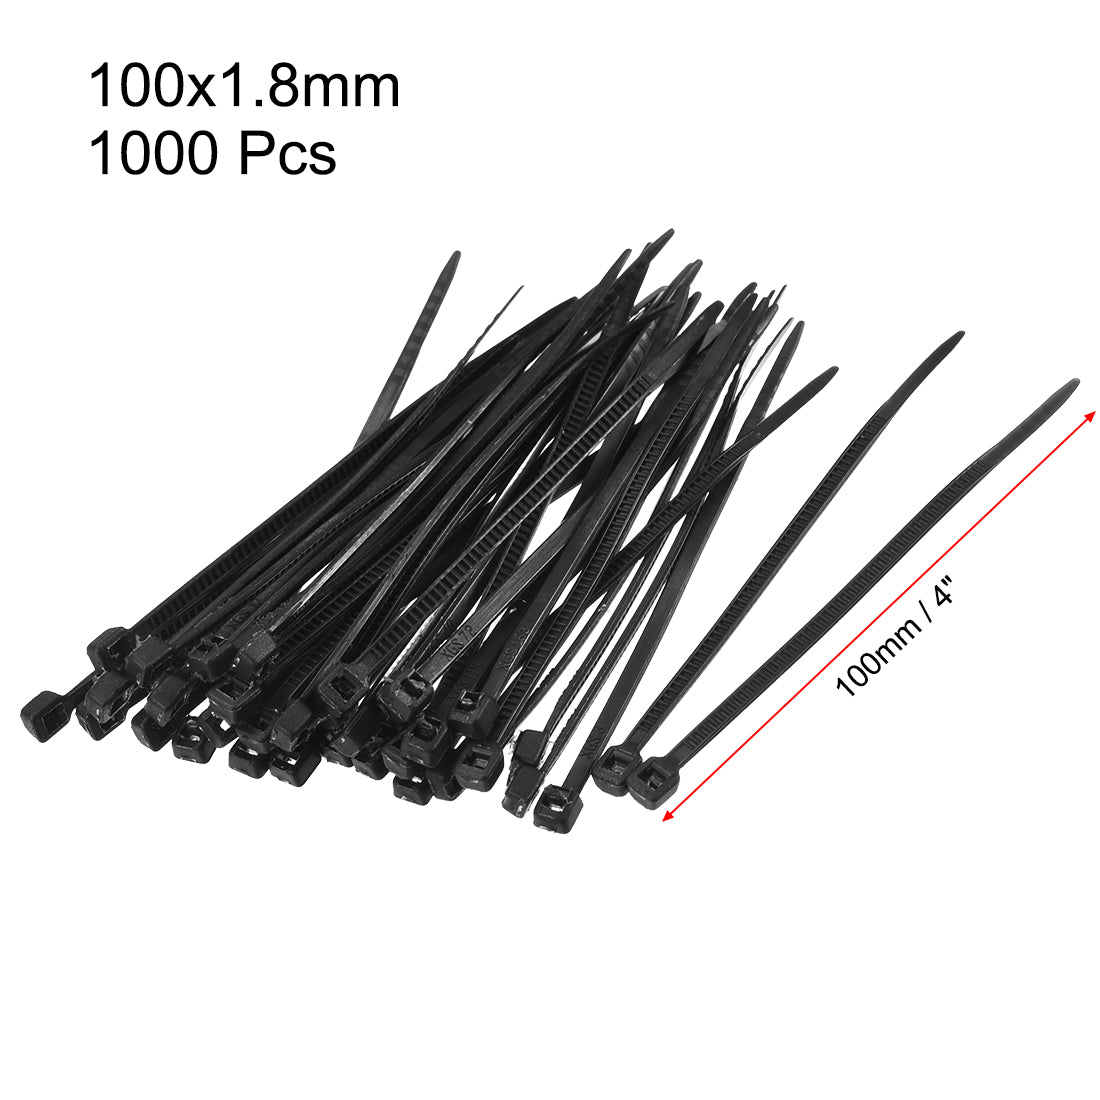 uxcell Uxcell Cable Zip Ties 100mmx1.8mm Self-Locking Nylon Tie Wraps Black 1000pcs